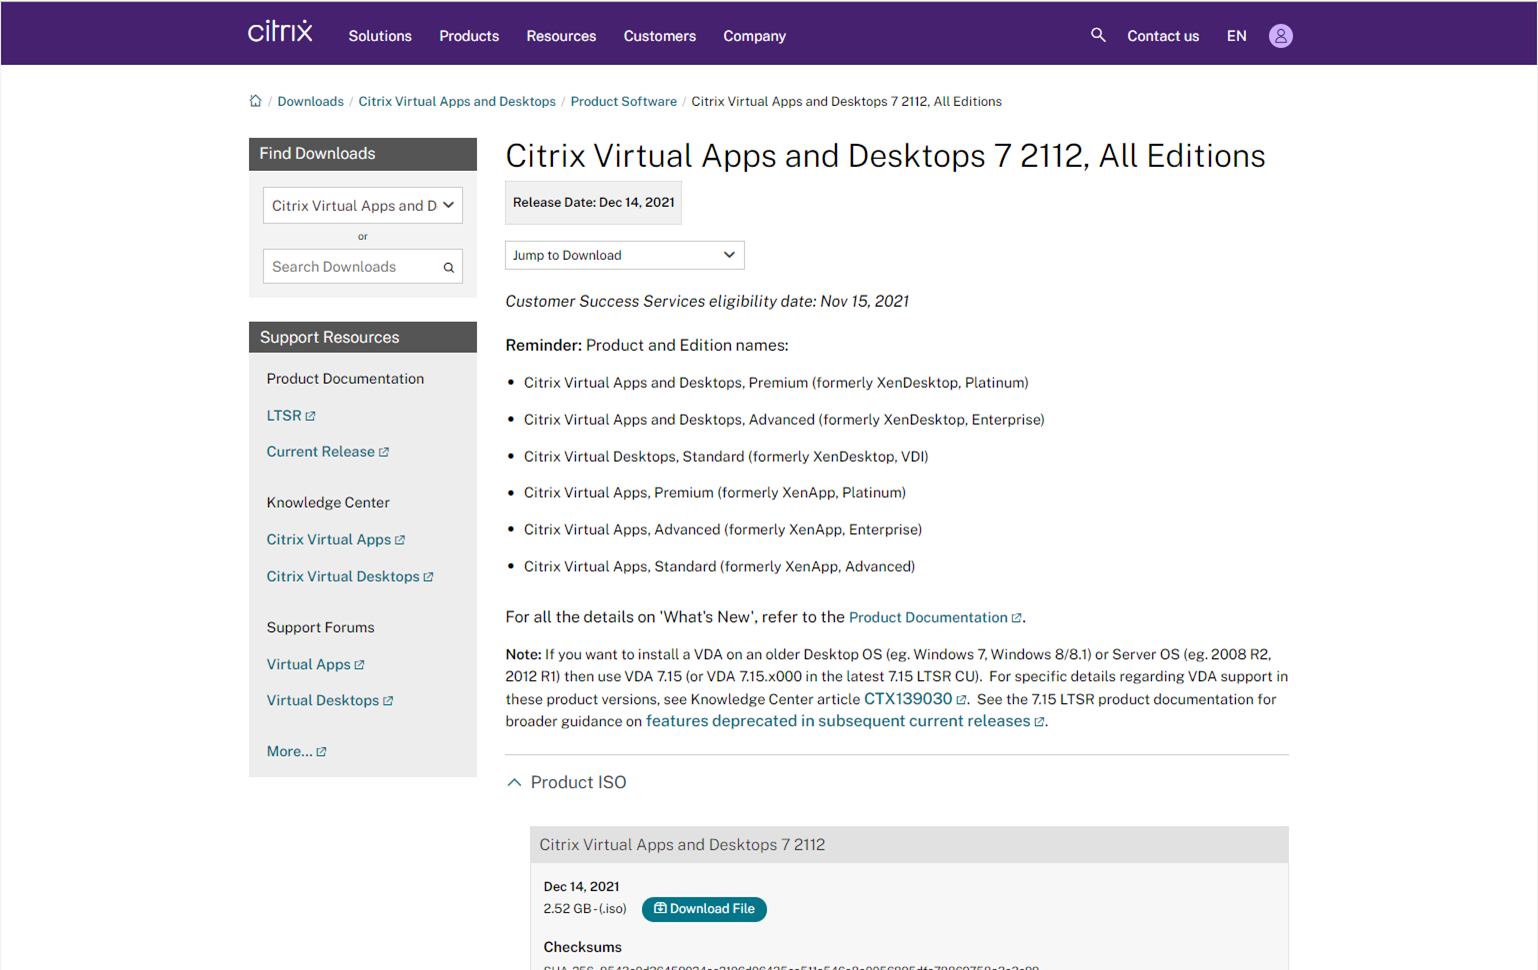 012422 1824 Howtoupgrad6 - How to upgrade to Citrix Virtual Apps 7 2112